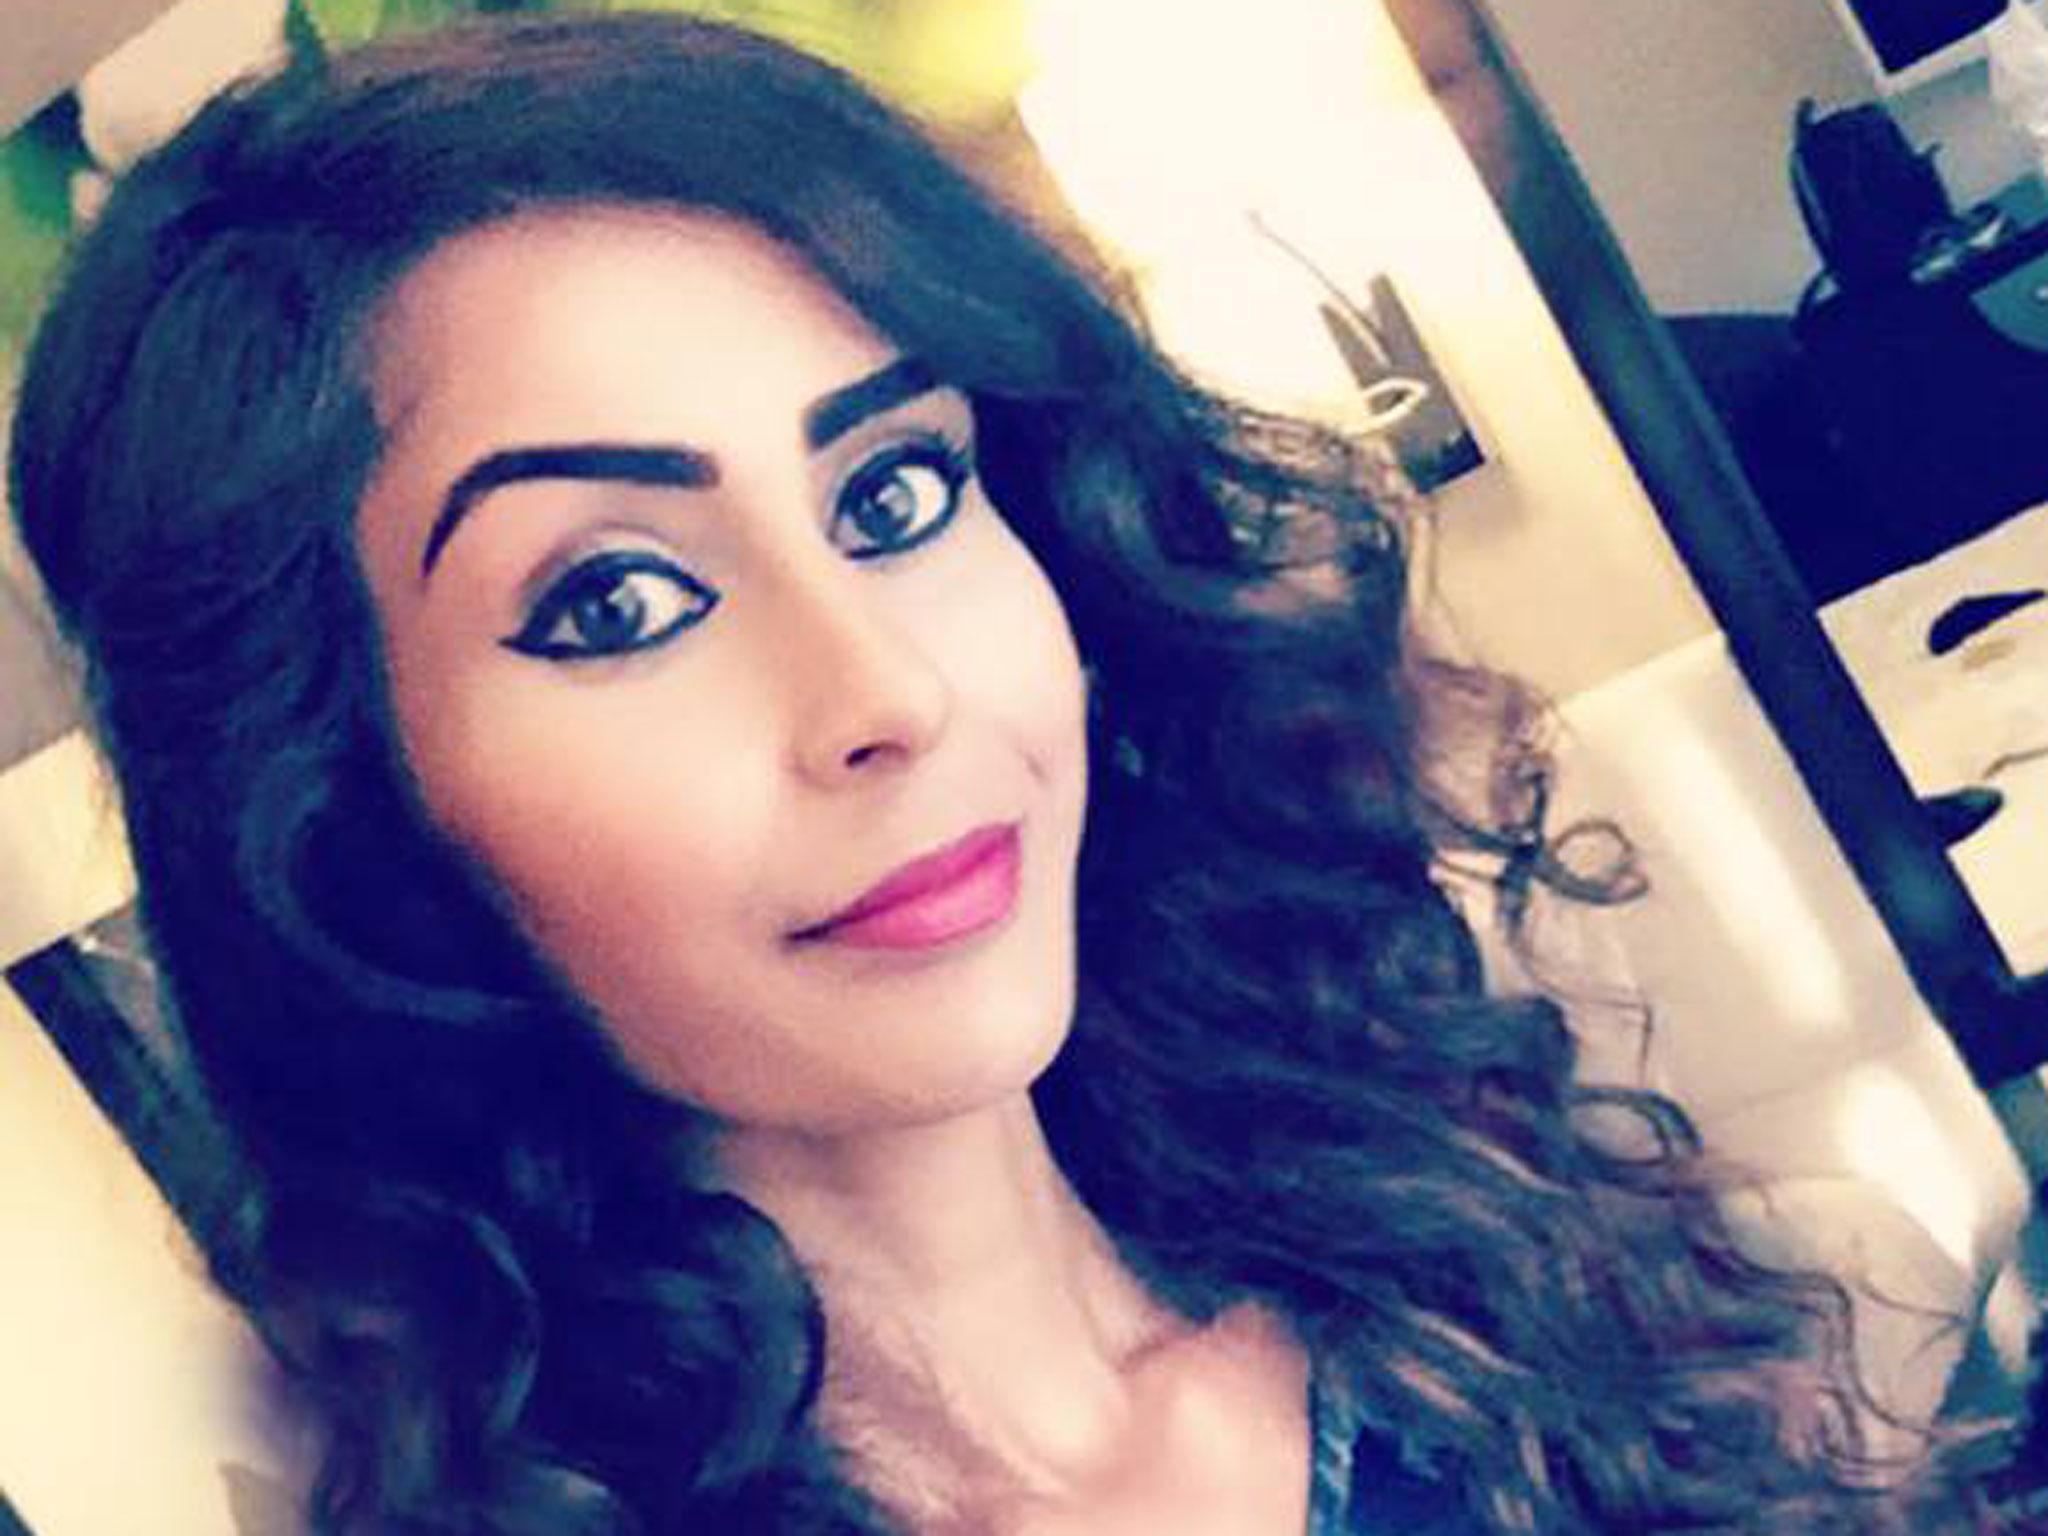 Ms Shaheen was quizzed under terror laws after cabin crew saw her reading a book about art